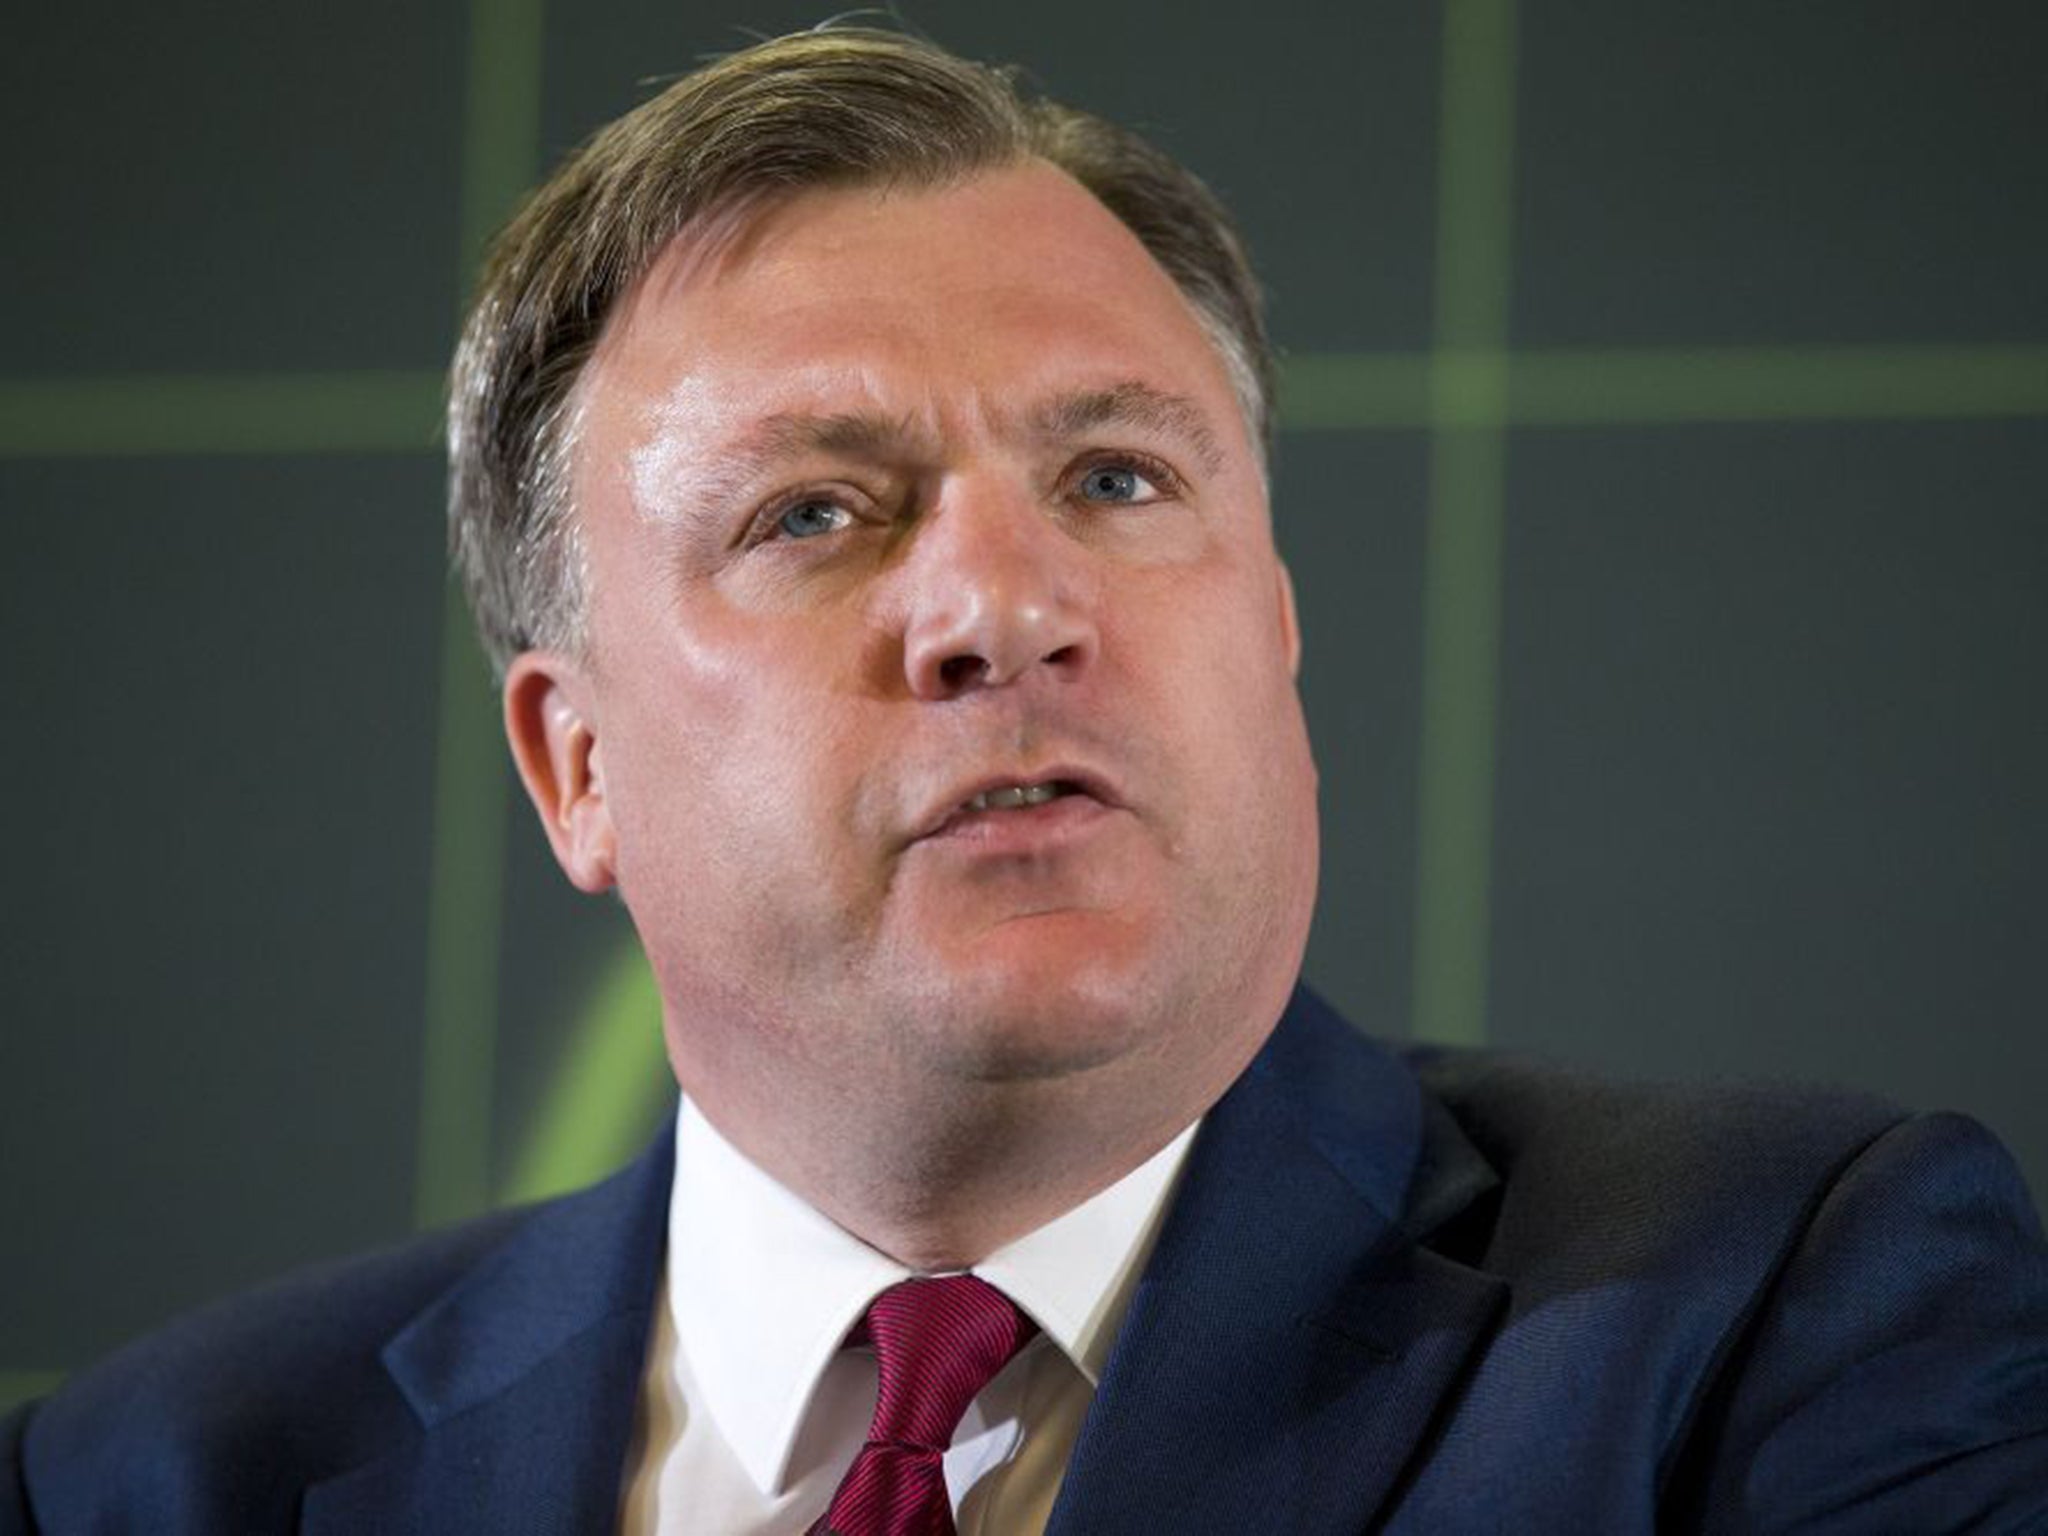 Ed Balls says small and medium-sized companies are fearful the potential for a hard Brexit could cause big damage to the British economy